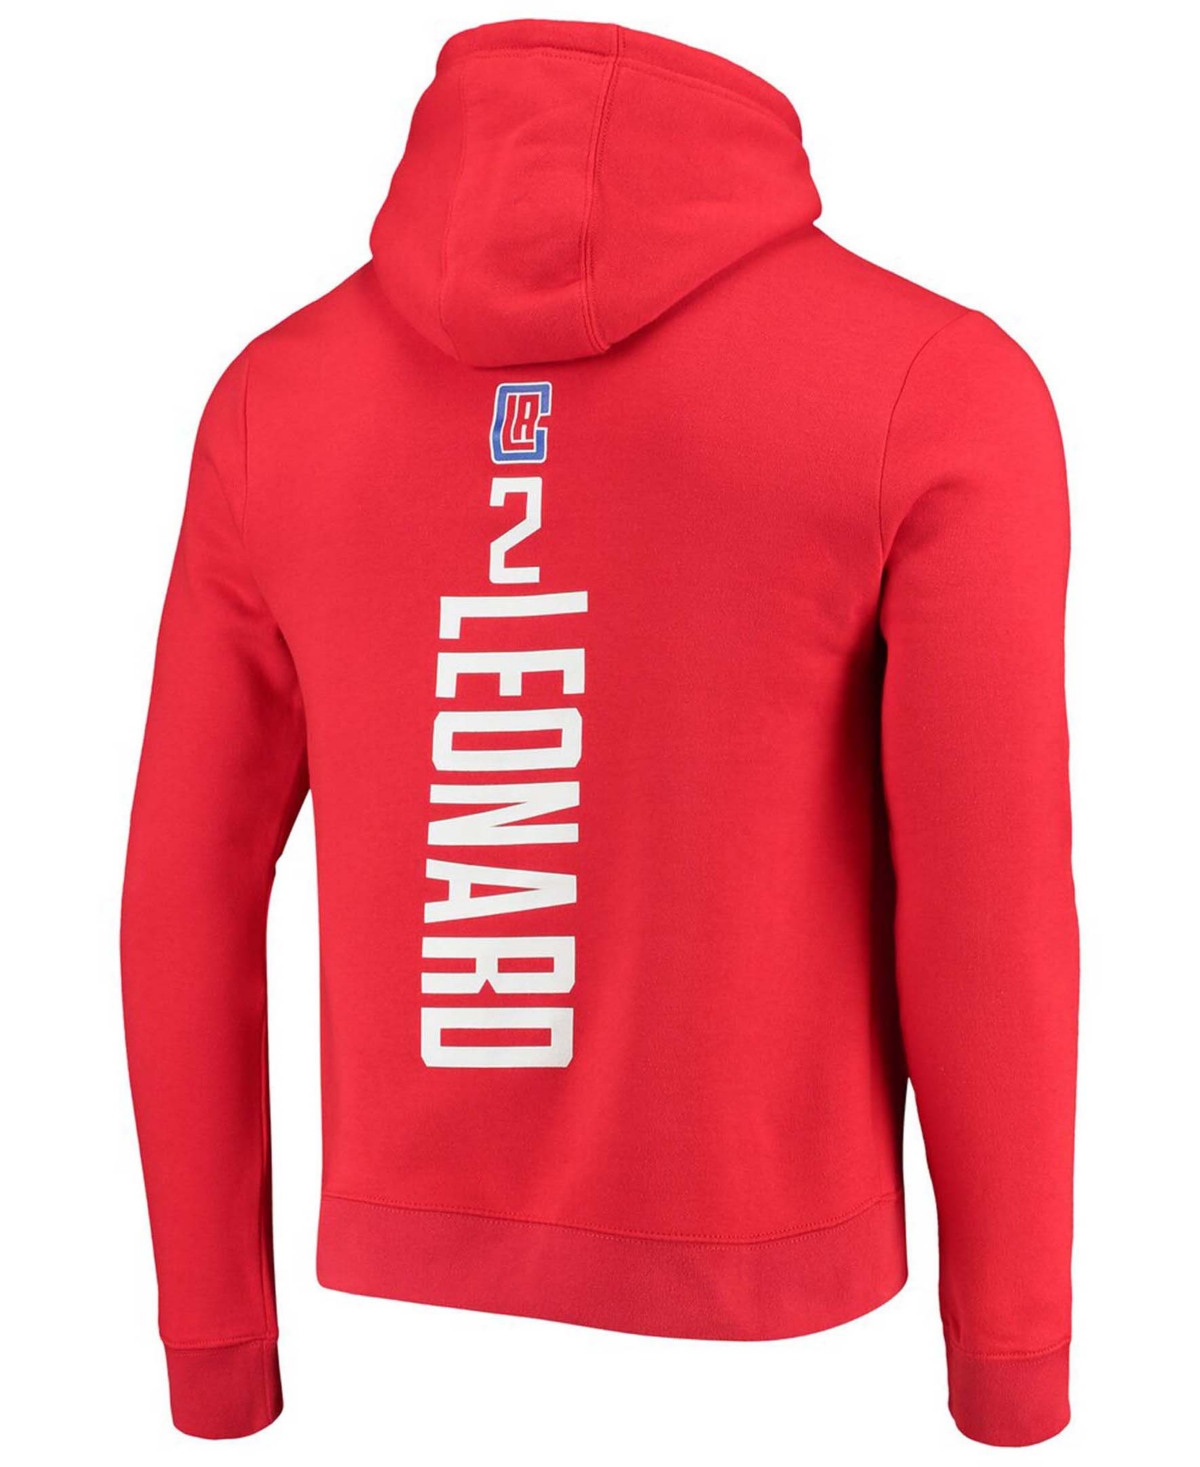 Shop Fanatics Men's Kawhi Leonard Red La Clippers Team Playmaker Name And Number Pullover Hoodie